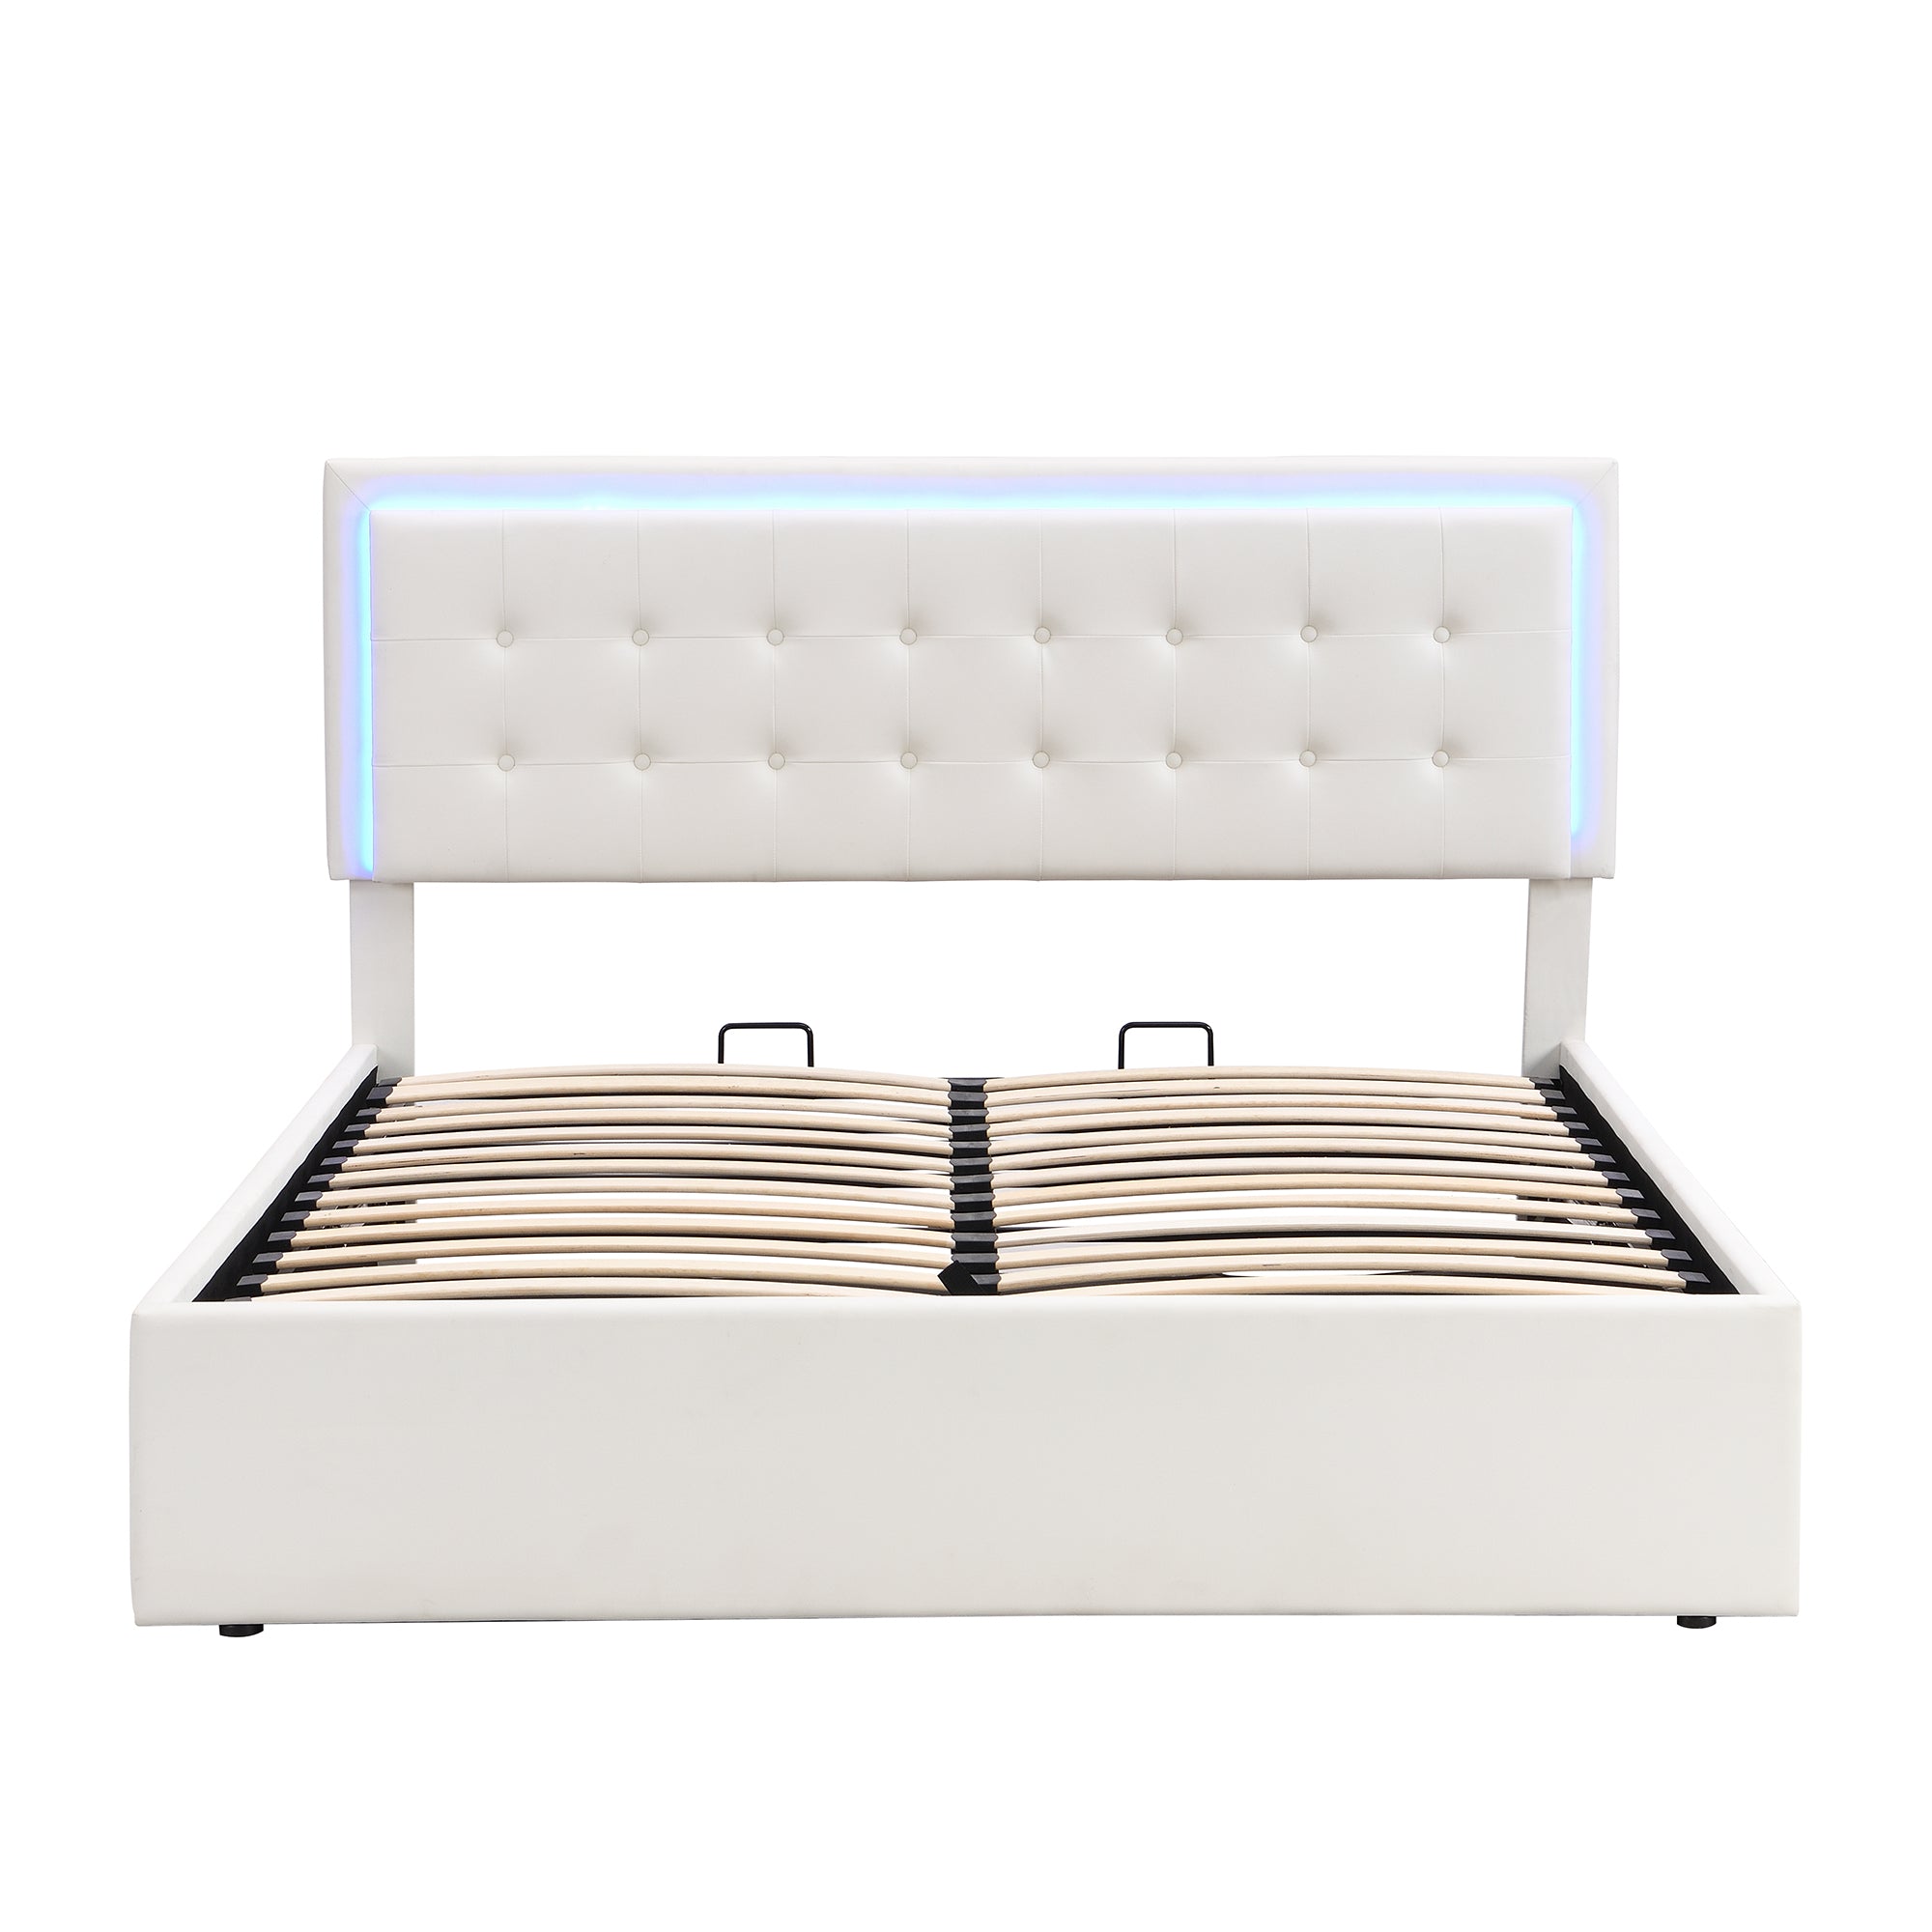 Bellemave® Queen Size Upholstered Platform Bed with Hydraulic Storage System and LED Lights Bellemave®